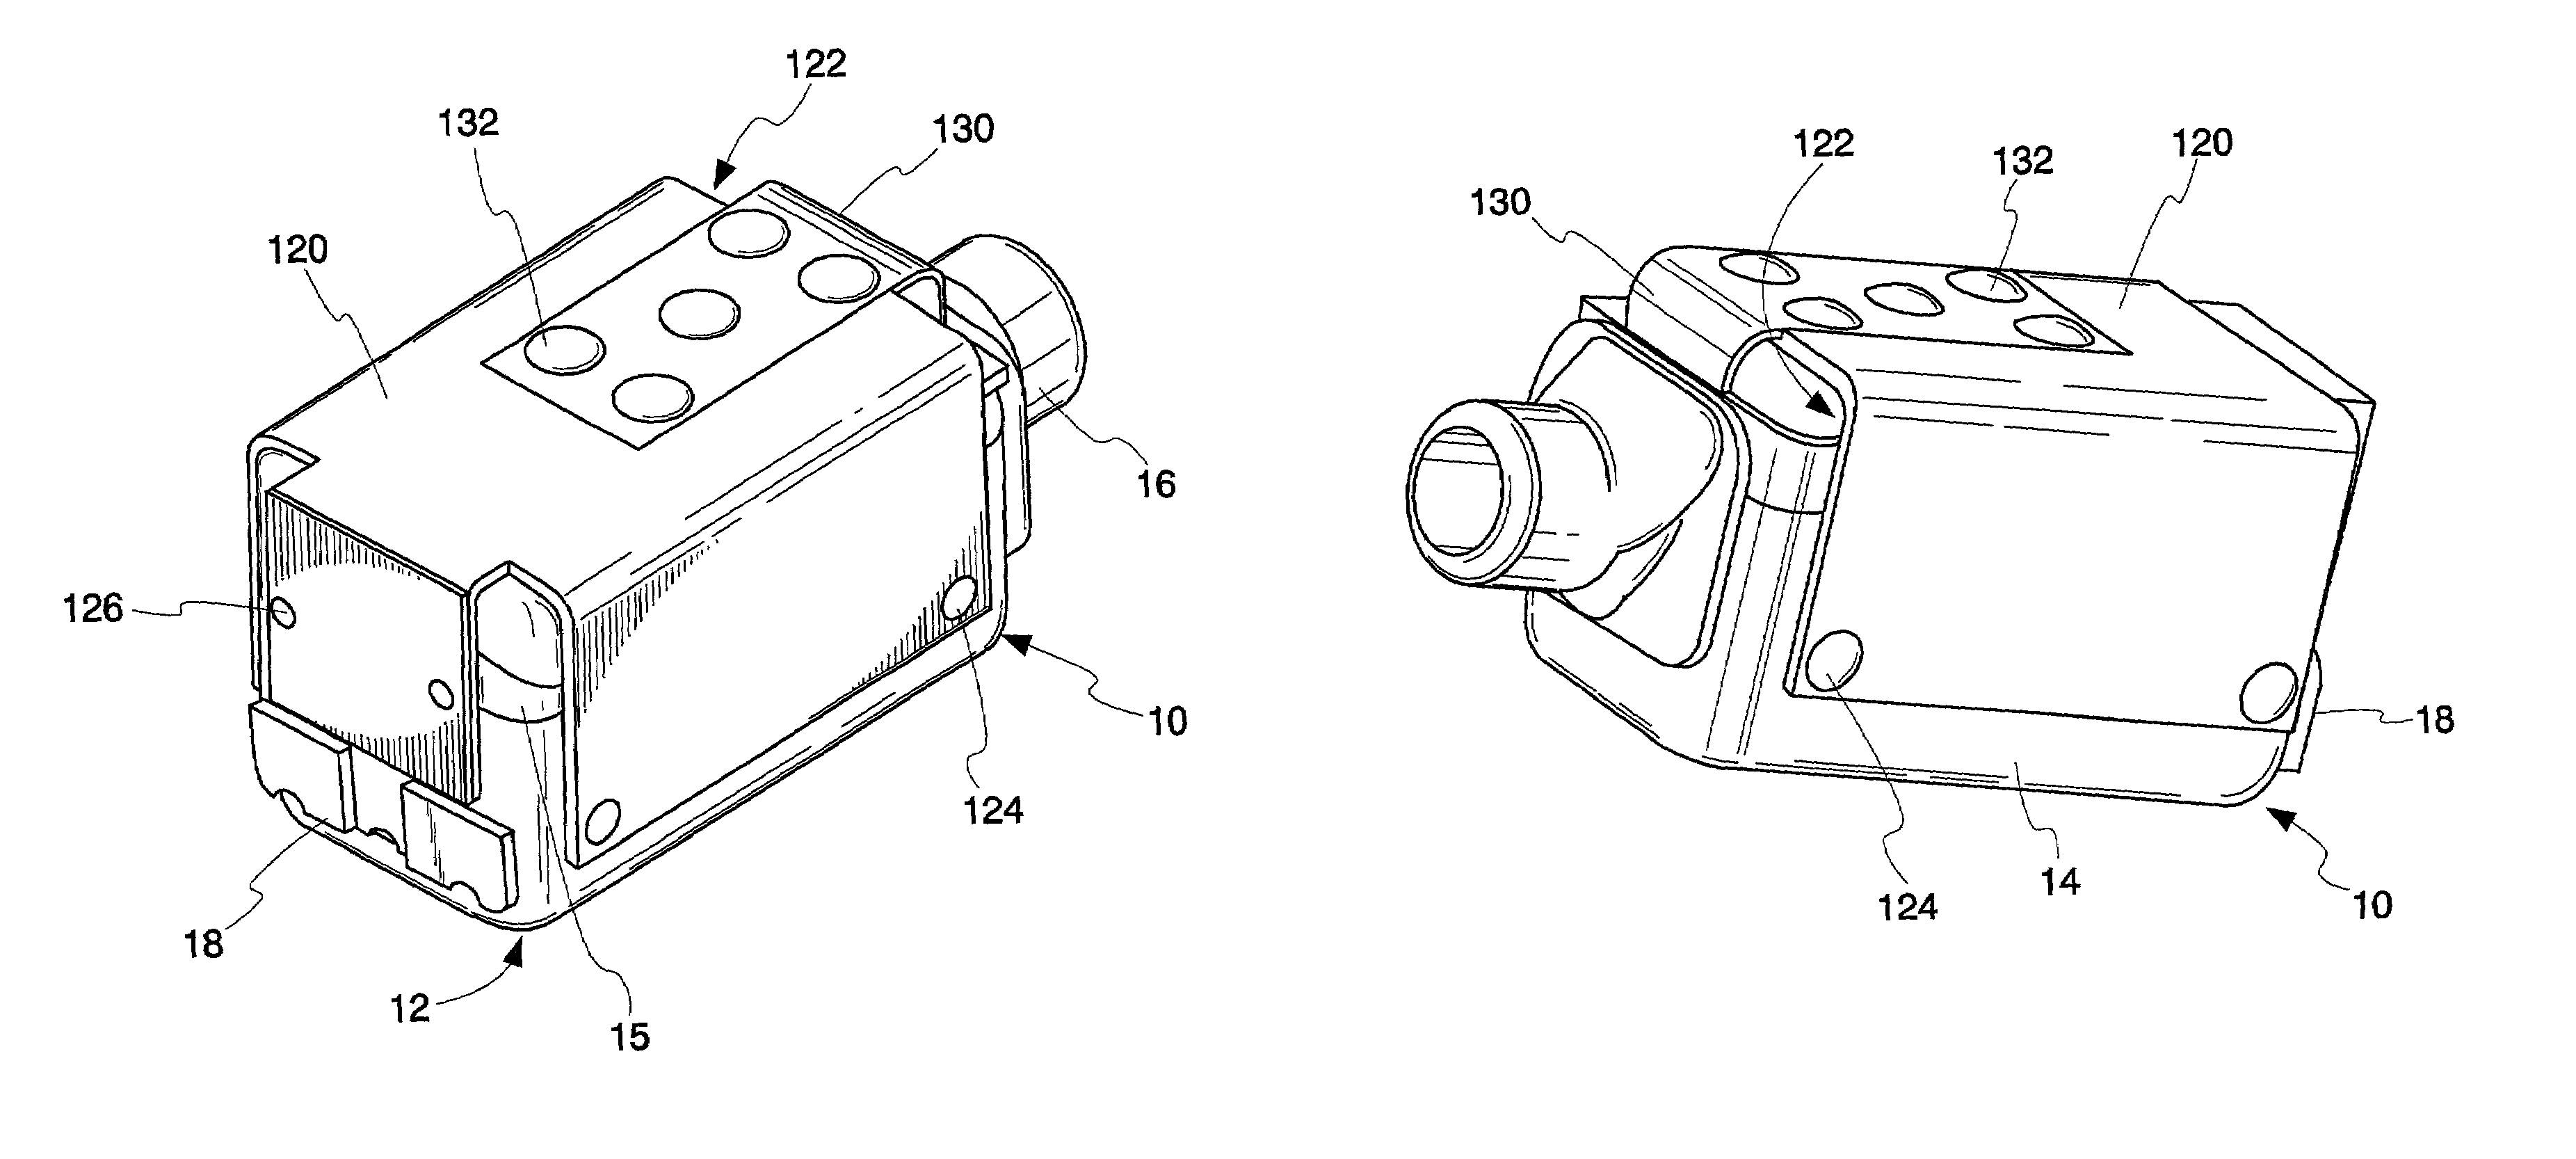 Acoustical receiver housing for hearing aids